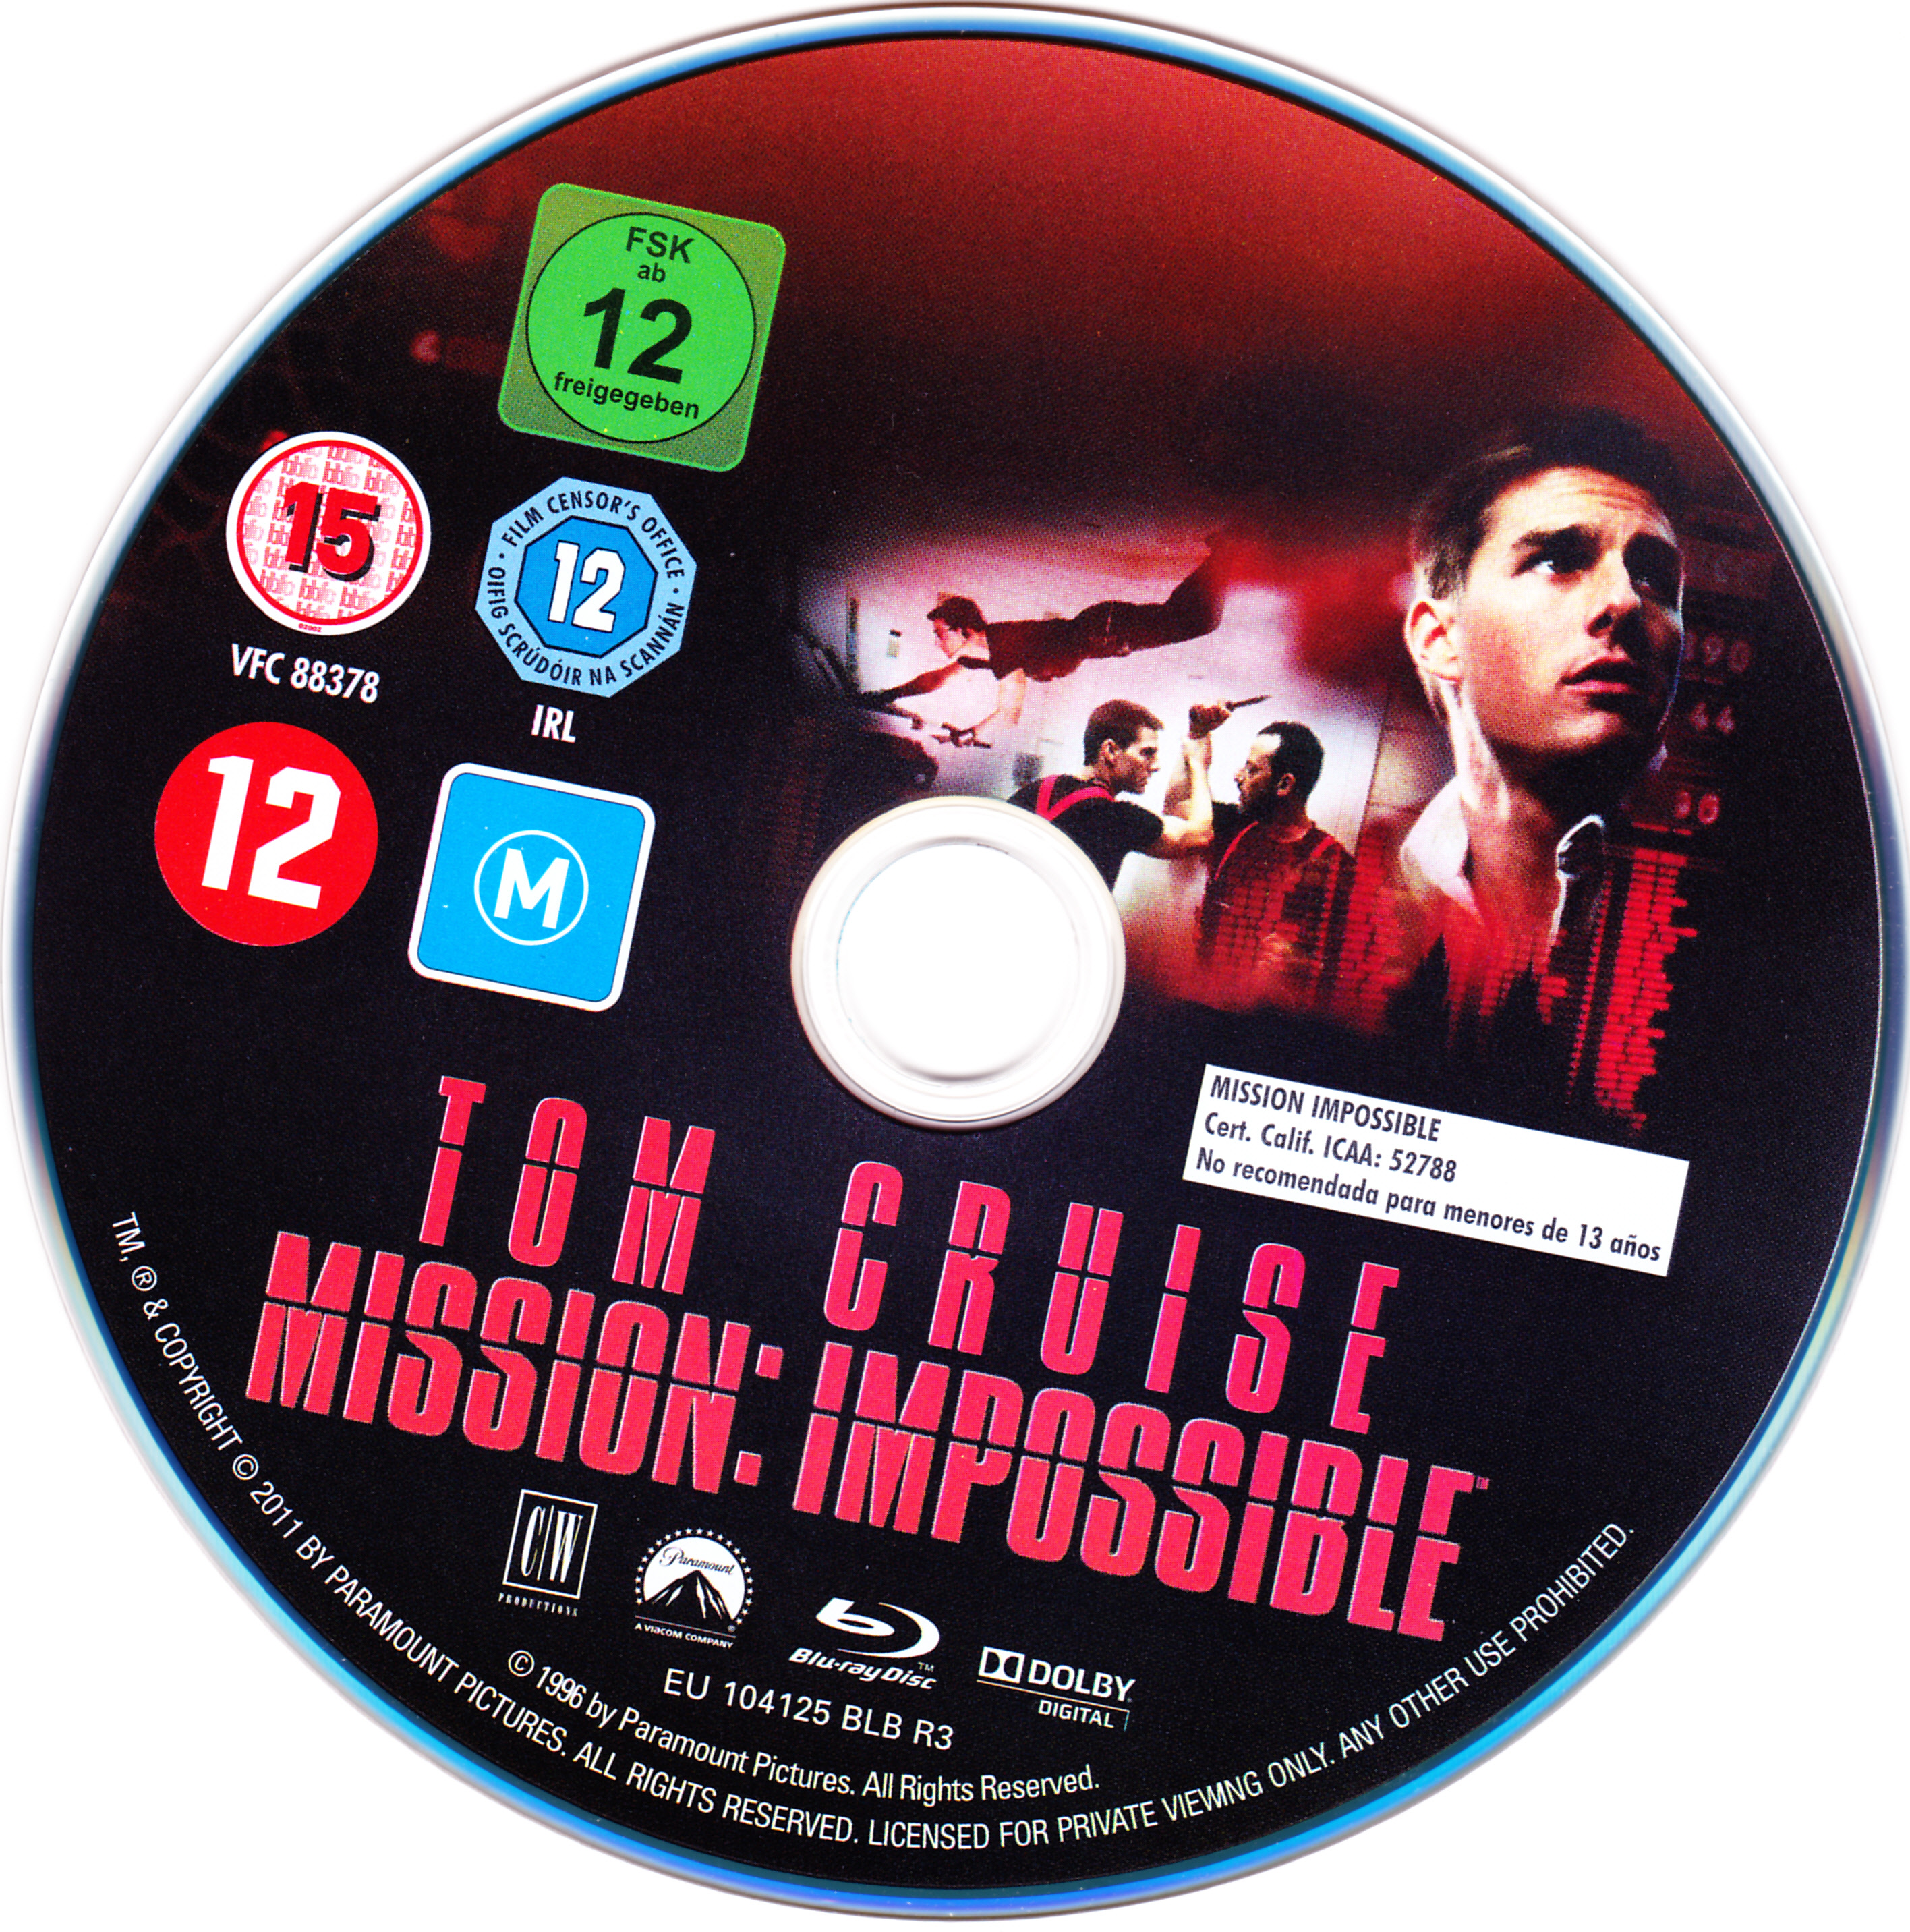 Mission impossible (BLU-RAY)